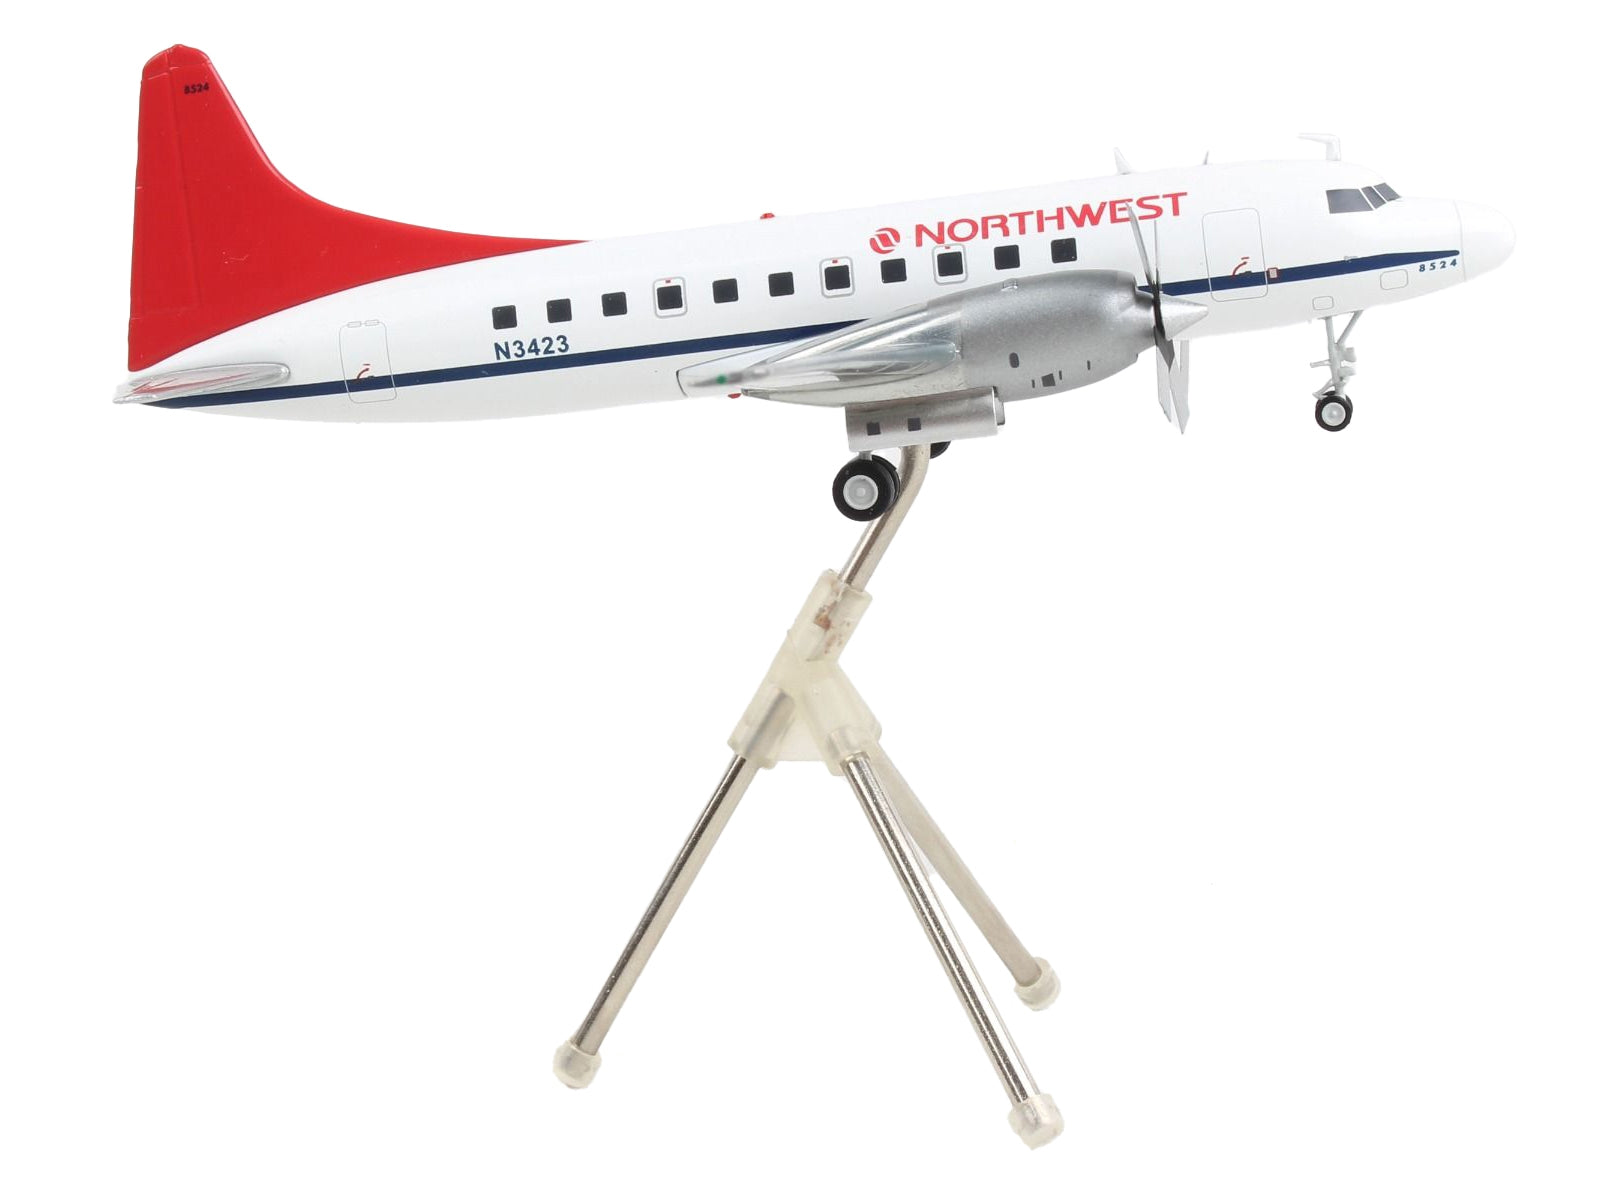 Convair CV-580 Commercial Aircraft "Northwest Airlines" White with Red Tail "Gemini 200" Series 1/200 Diecast Model Airplane by GeminiJets